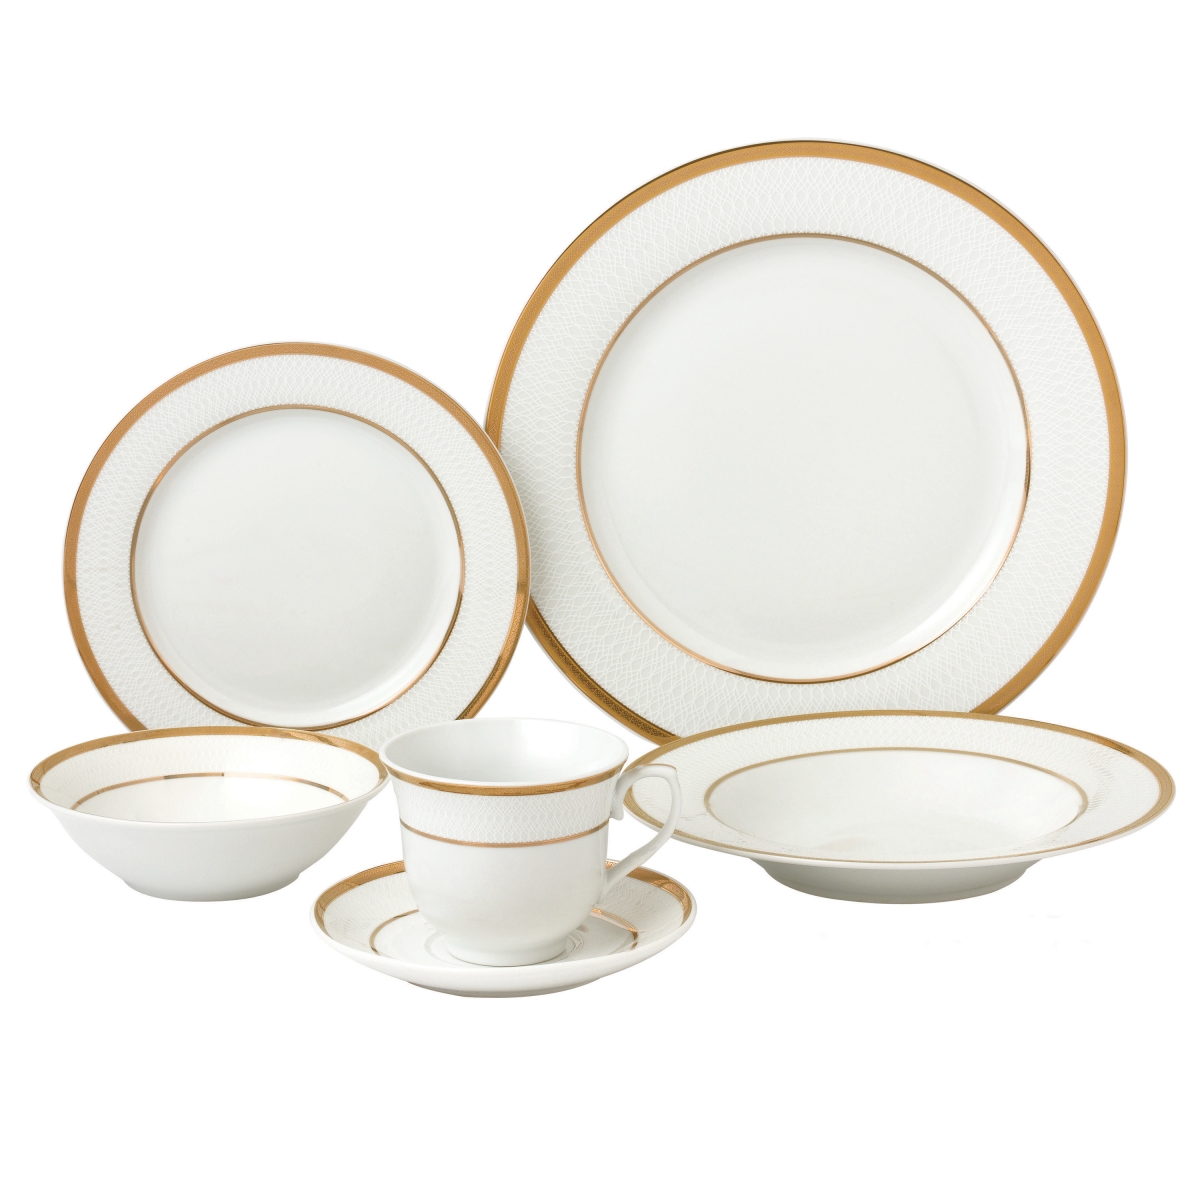 Picture of Lorenzo Import LH431 24 Piece Porcelain Dinnerware Service, Gold - for 4 Josephine